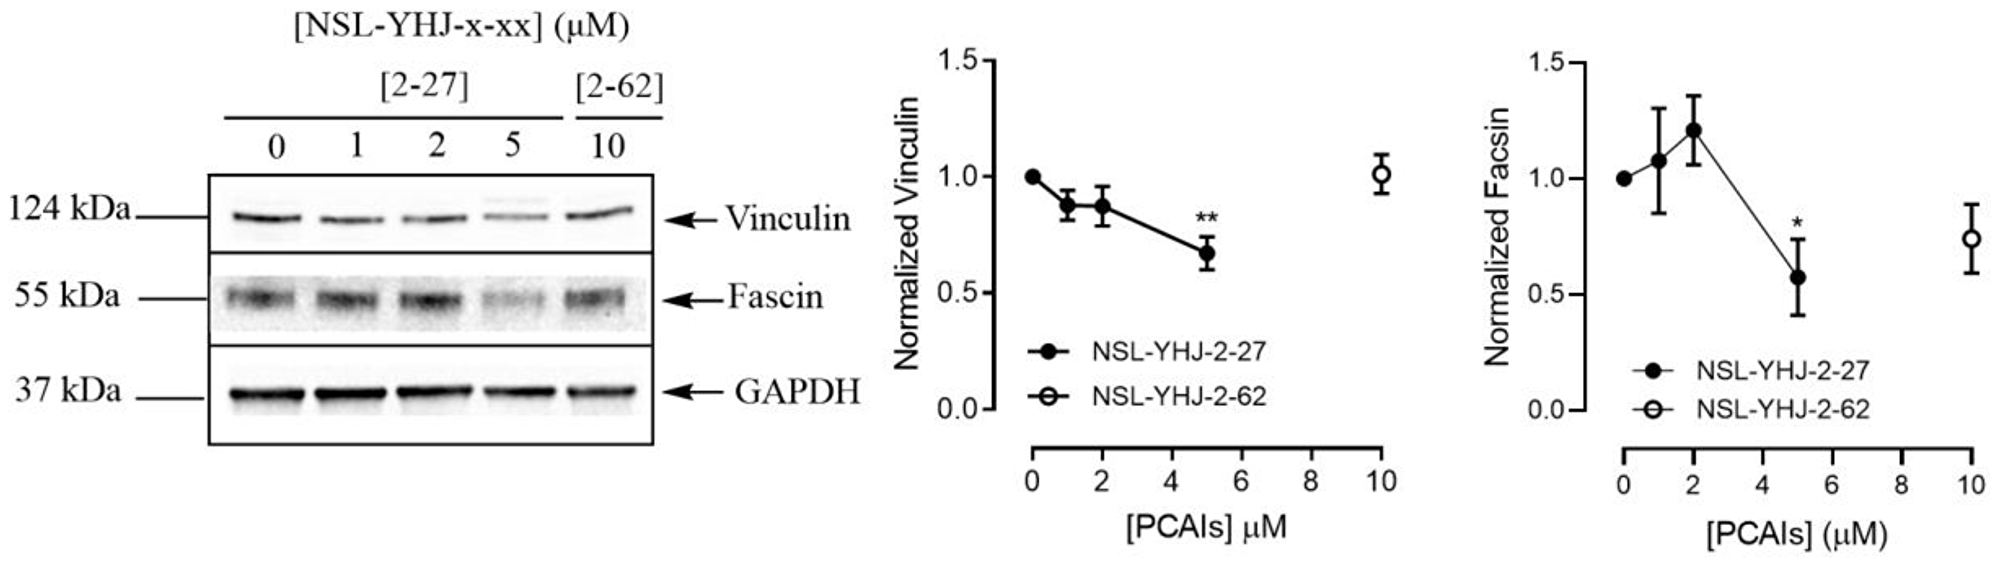 PCAIs decrease the levels of vinculin and fascin proteins.